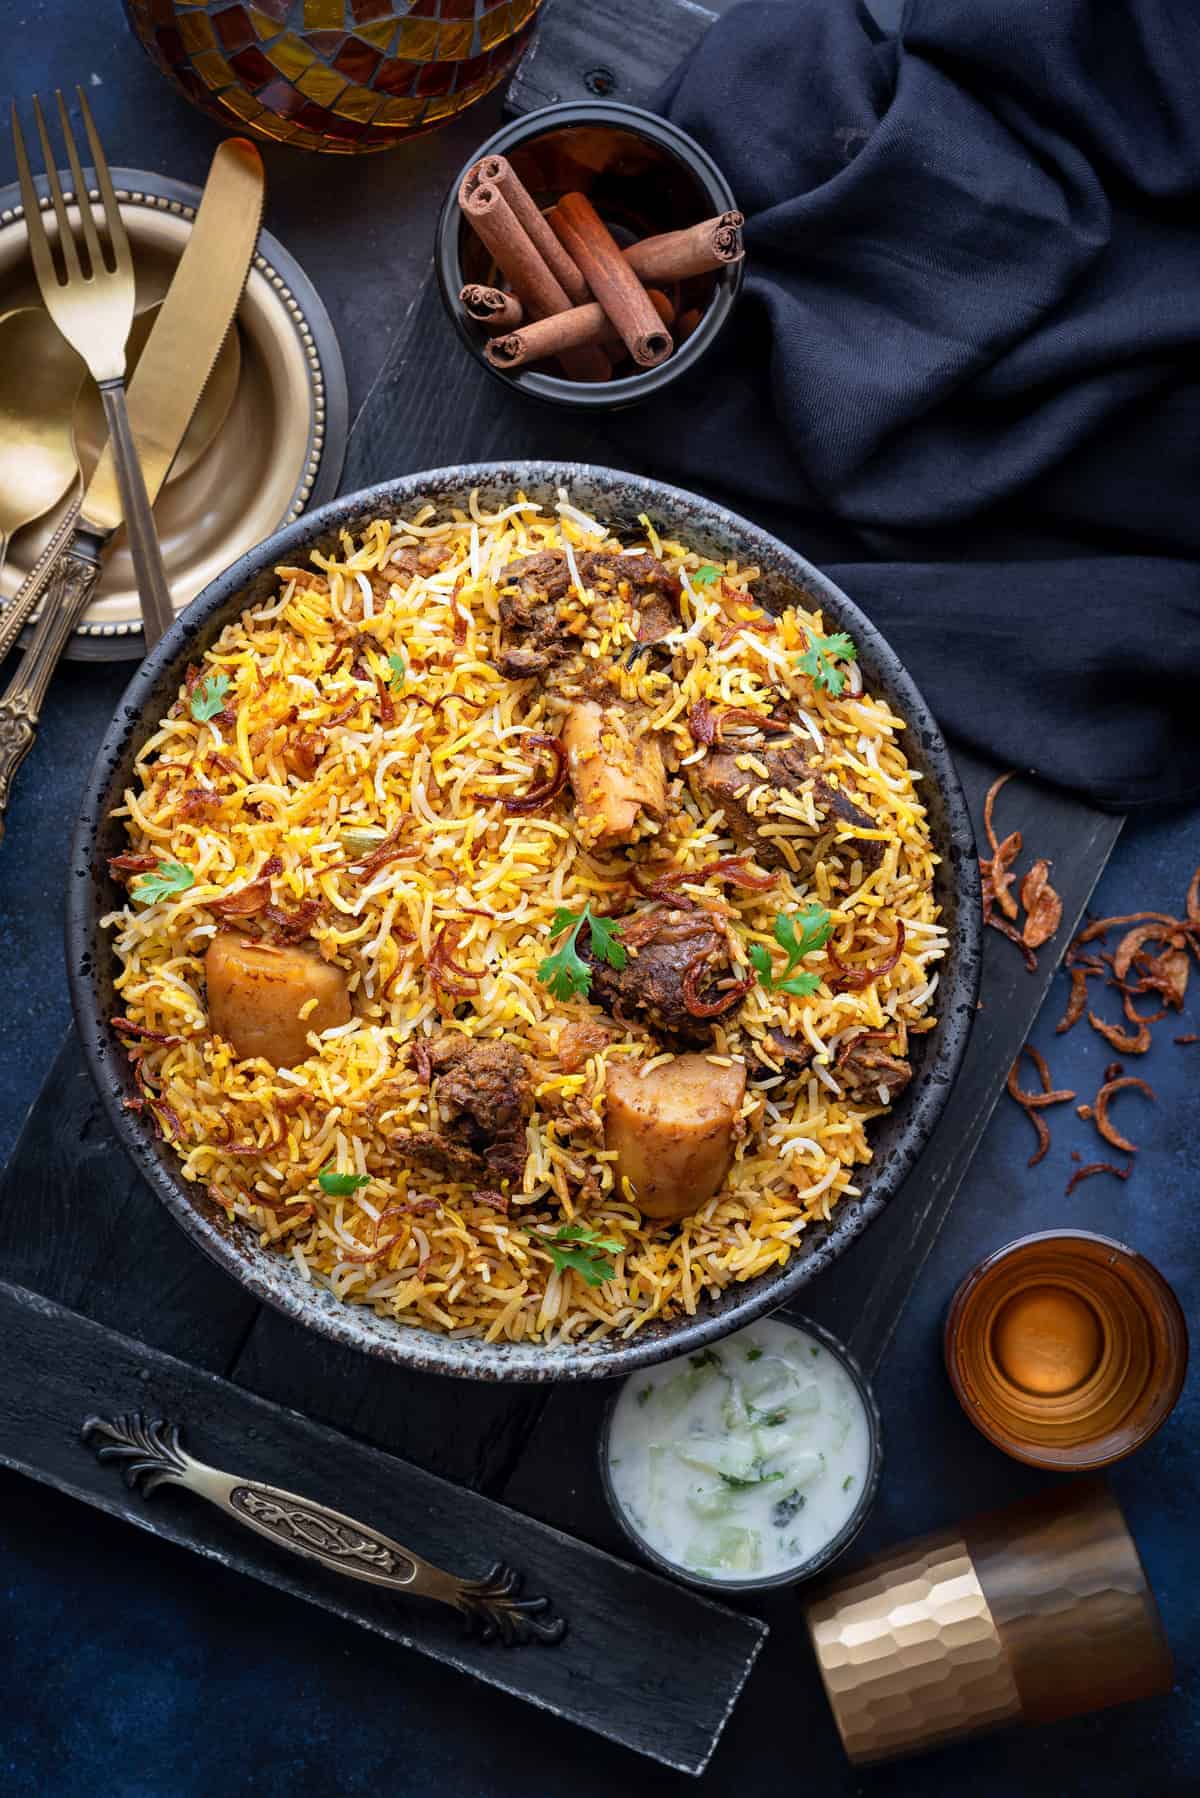 Overhead shot of Bombay Mutton Biryani served in large black bowl with raita on the side.